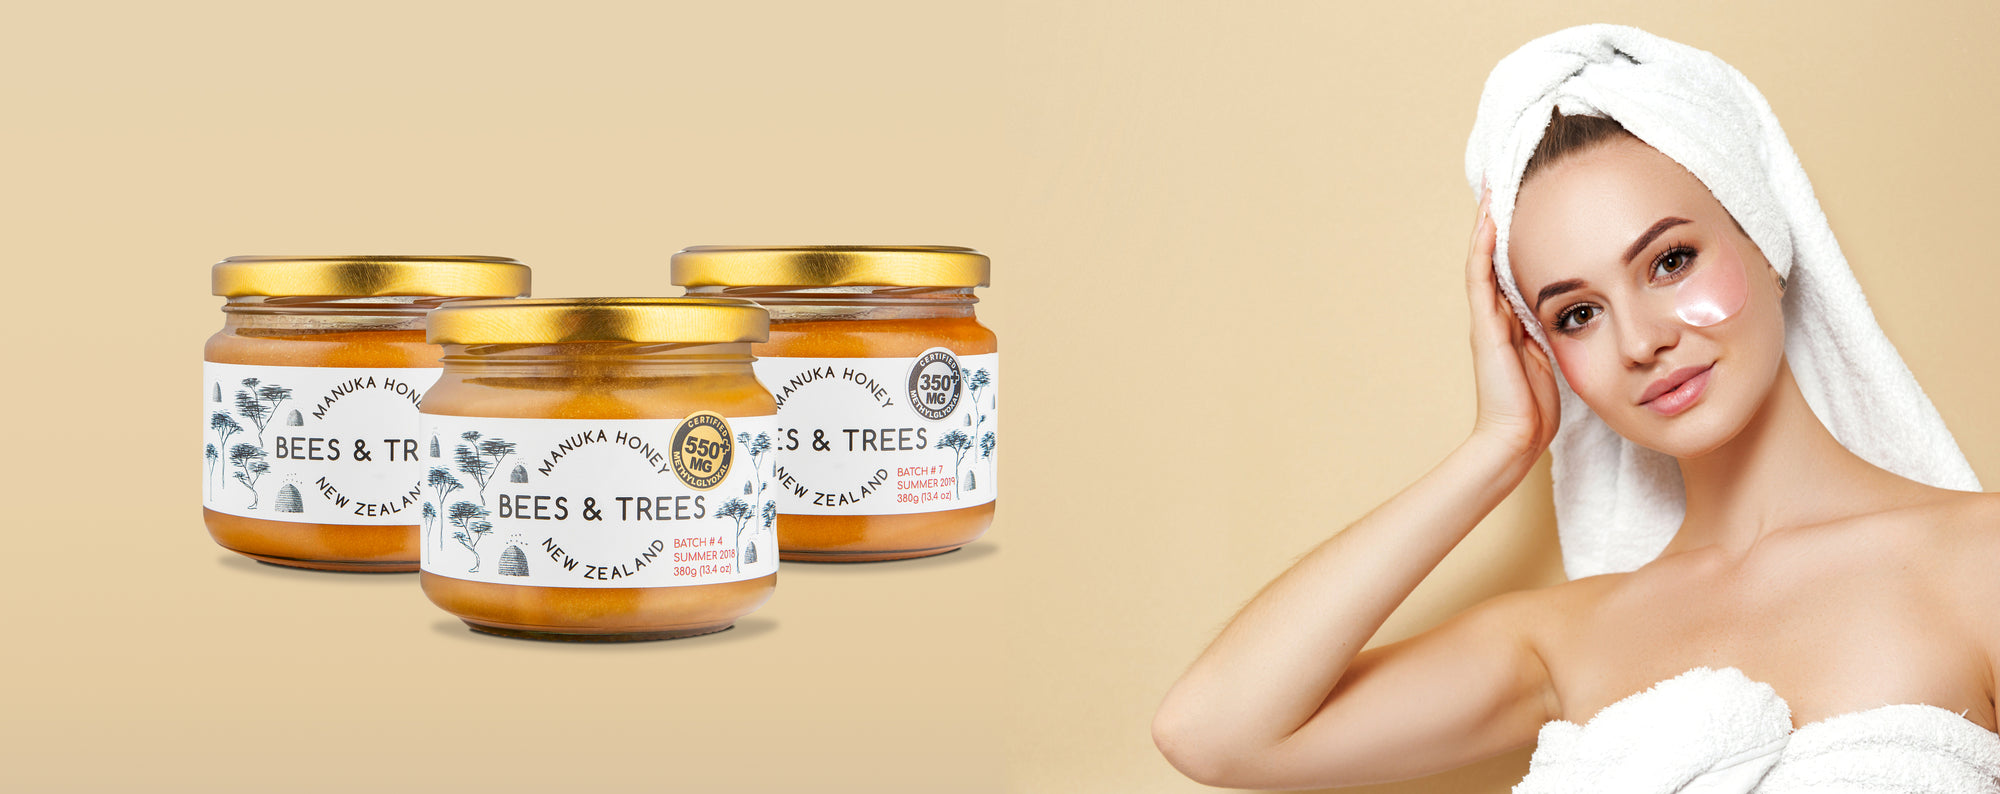 A model showing her skin next to a jar of Manuka honey